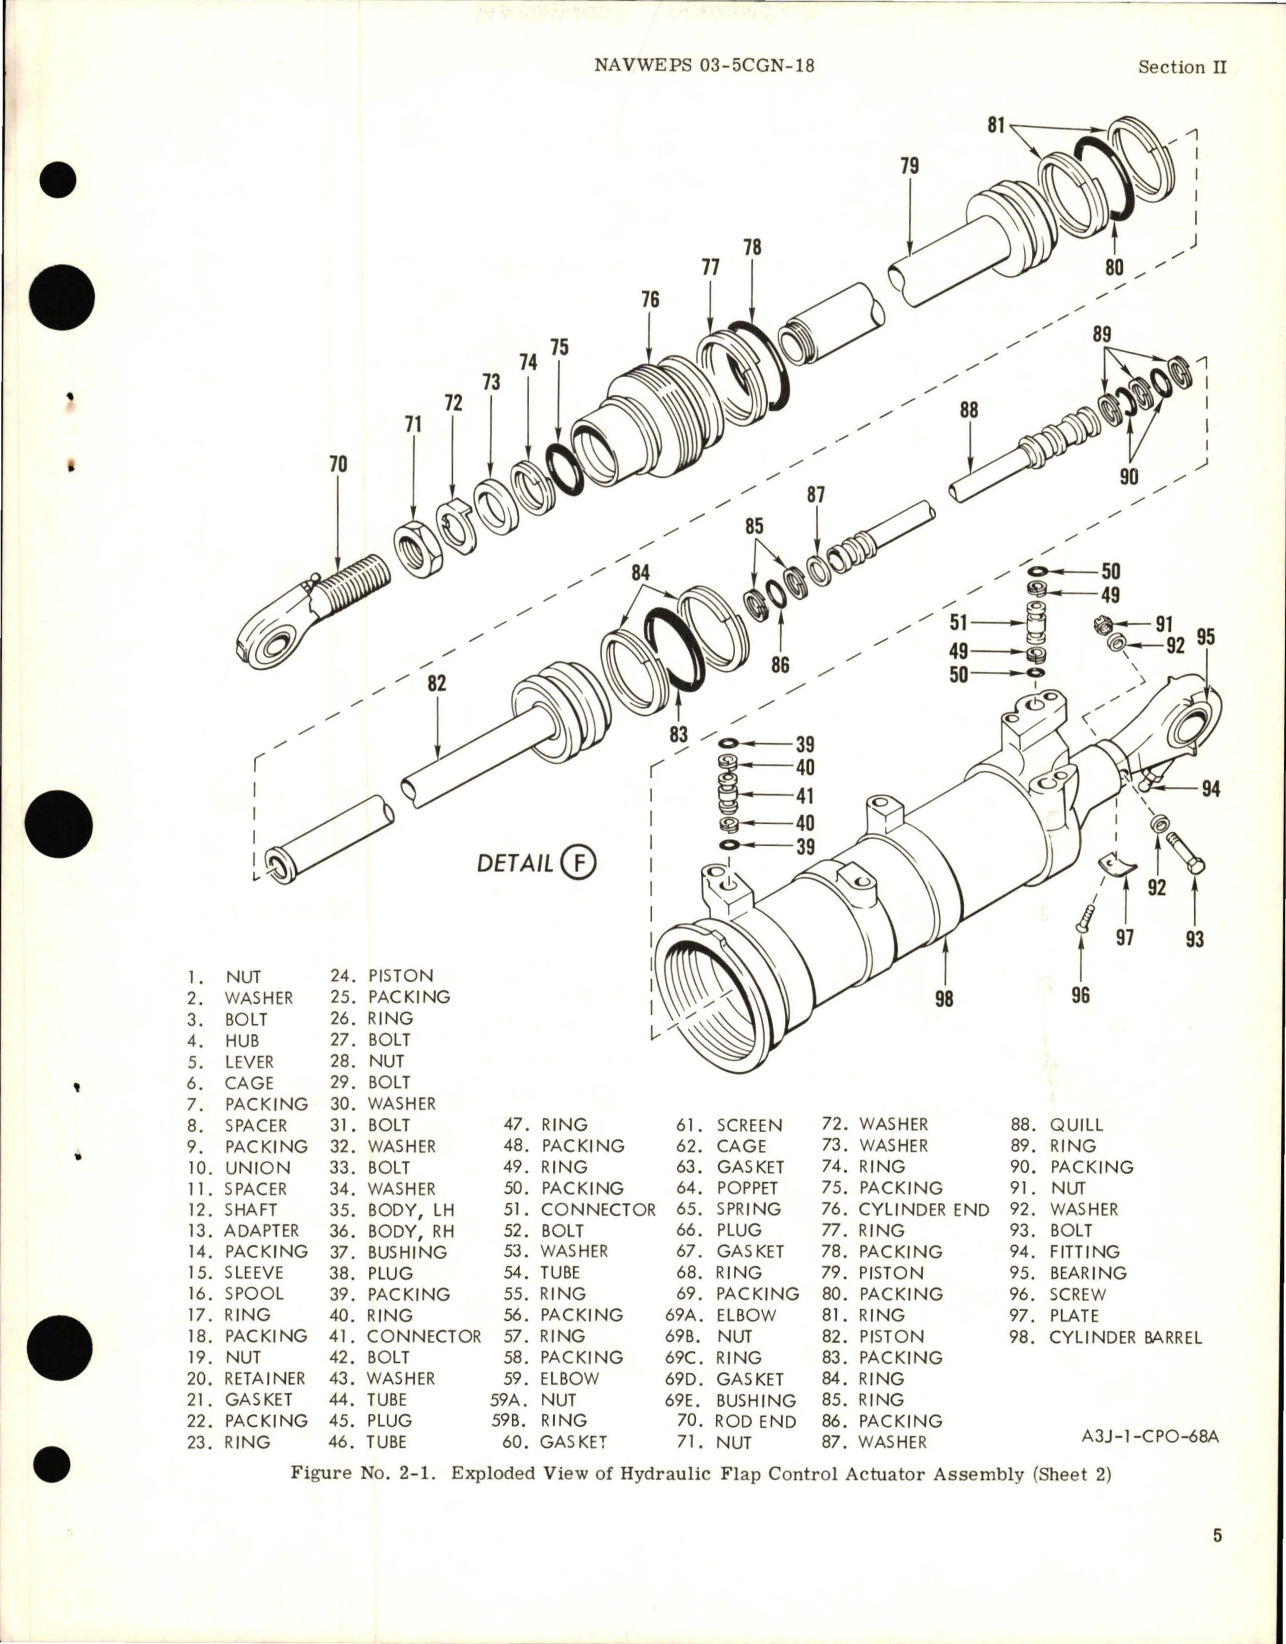 Sample page 7 from AirCorps Library document: Overhaul Instructions for Hydraulic Flap Control Actuator Assemblies - Part 247-58706 Series 